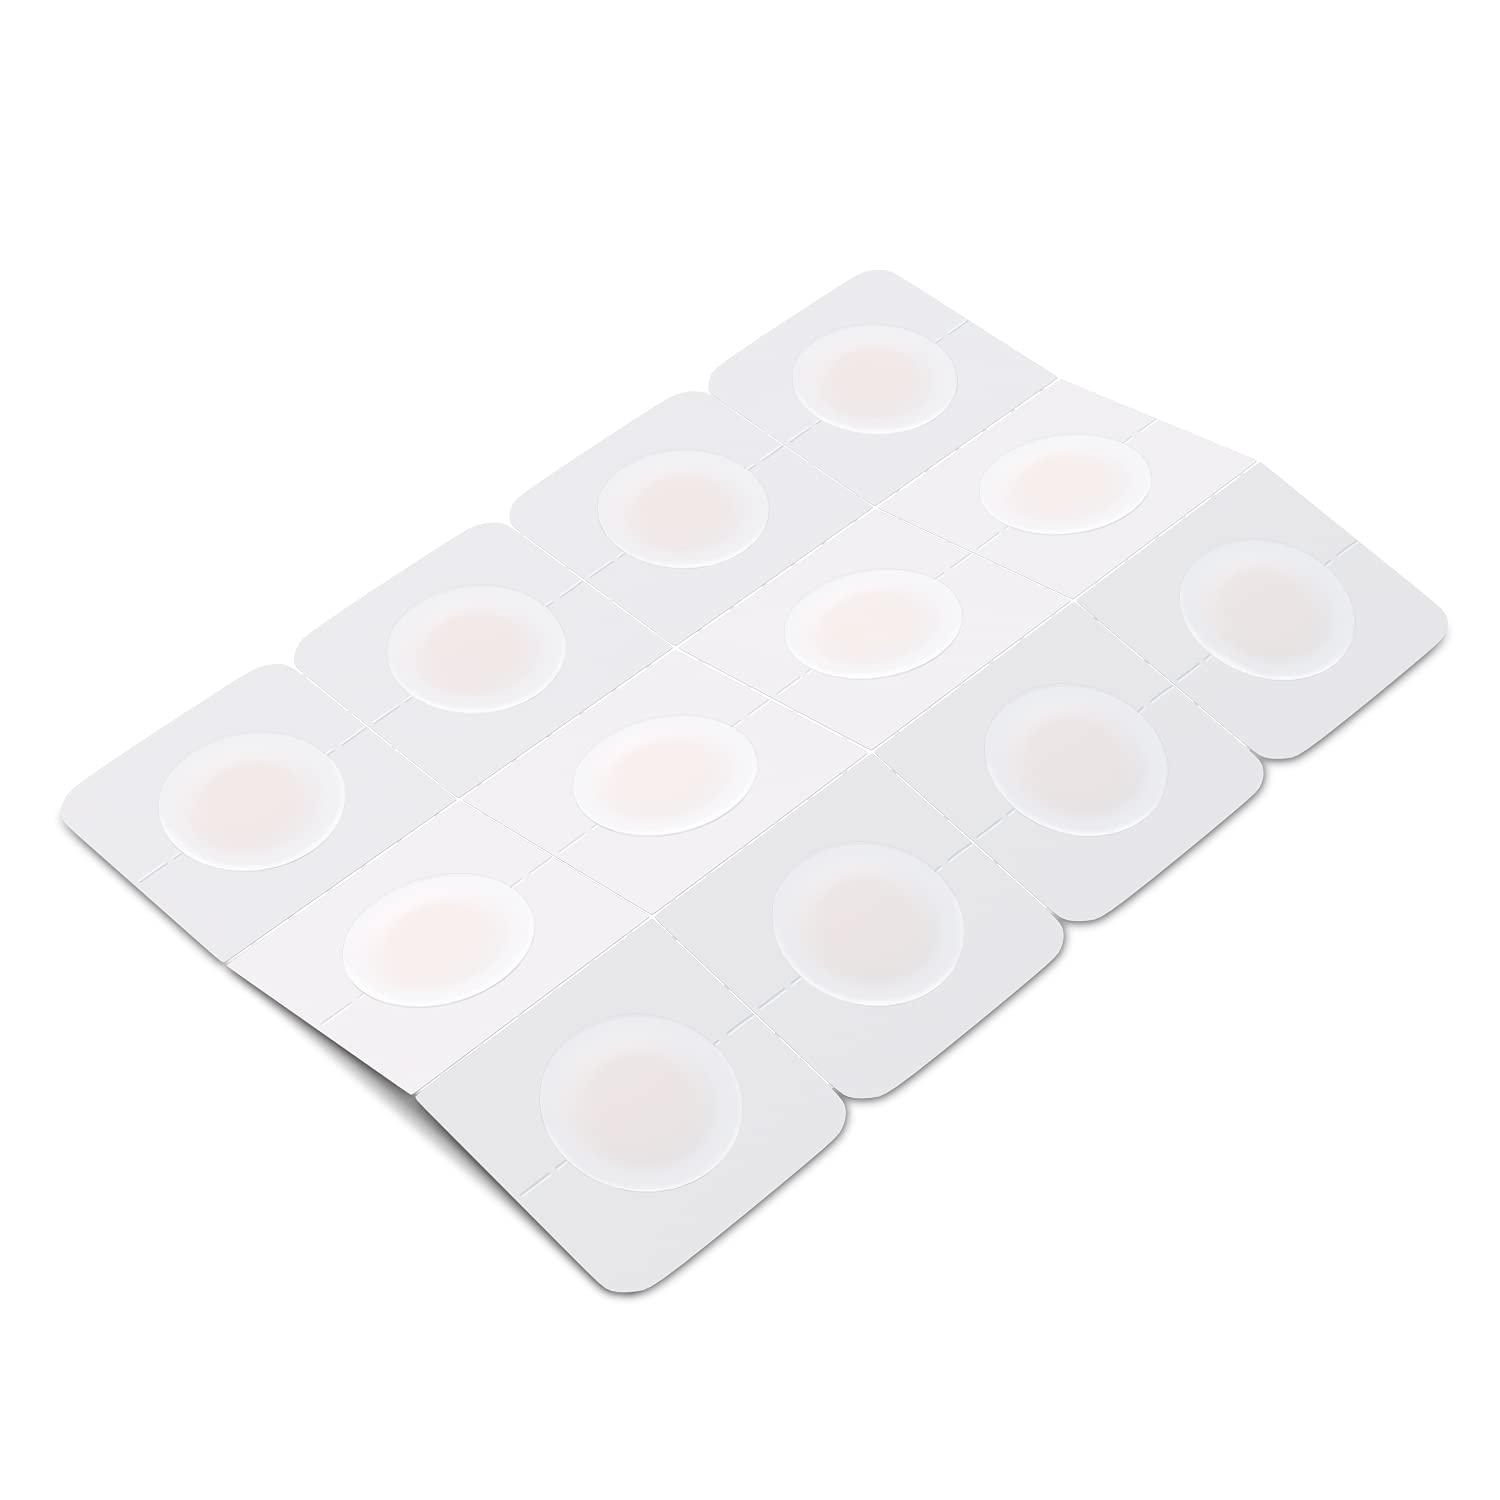 Cold Sore Duo 72 ct - Smart Cold Sore Patch - Soothe Itching, Burning